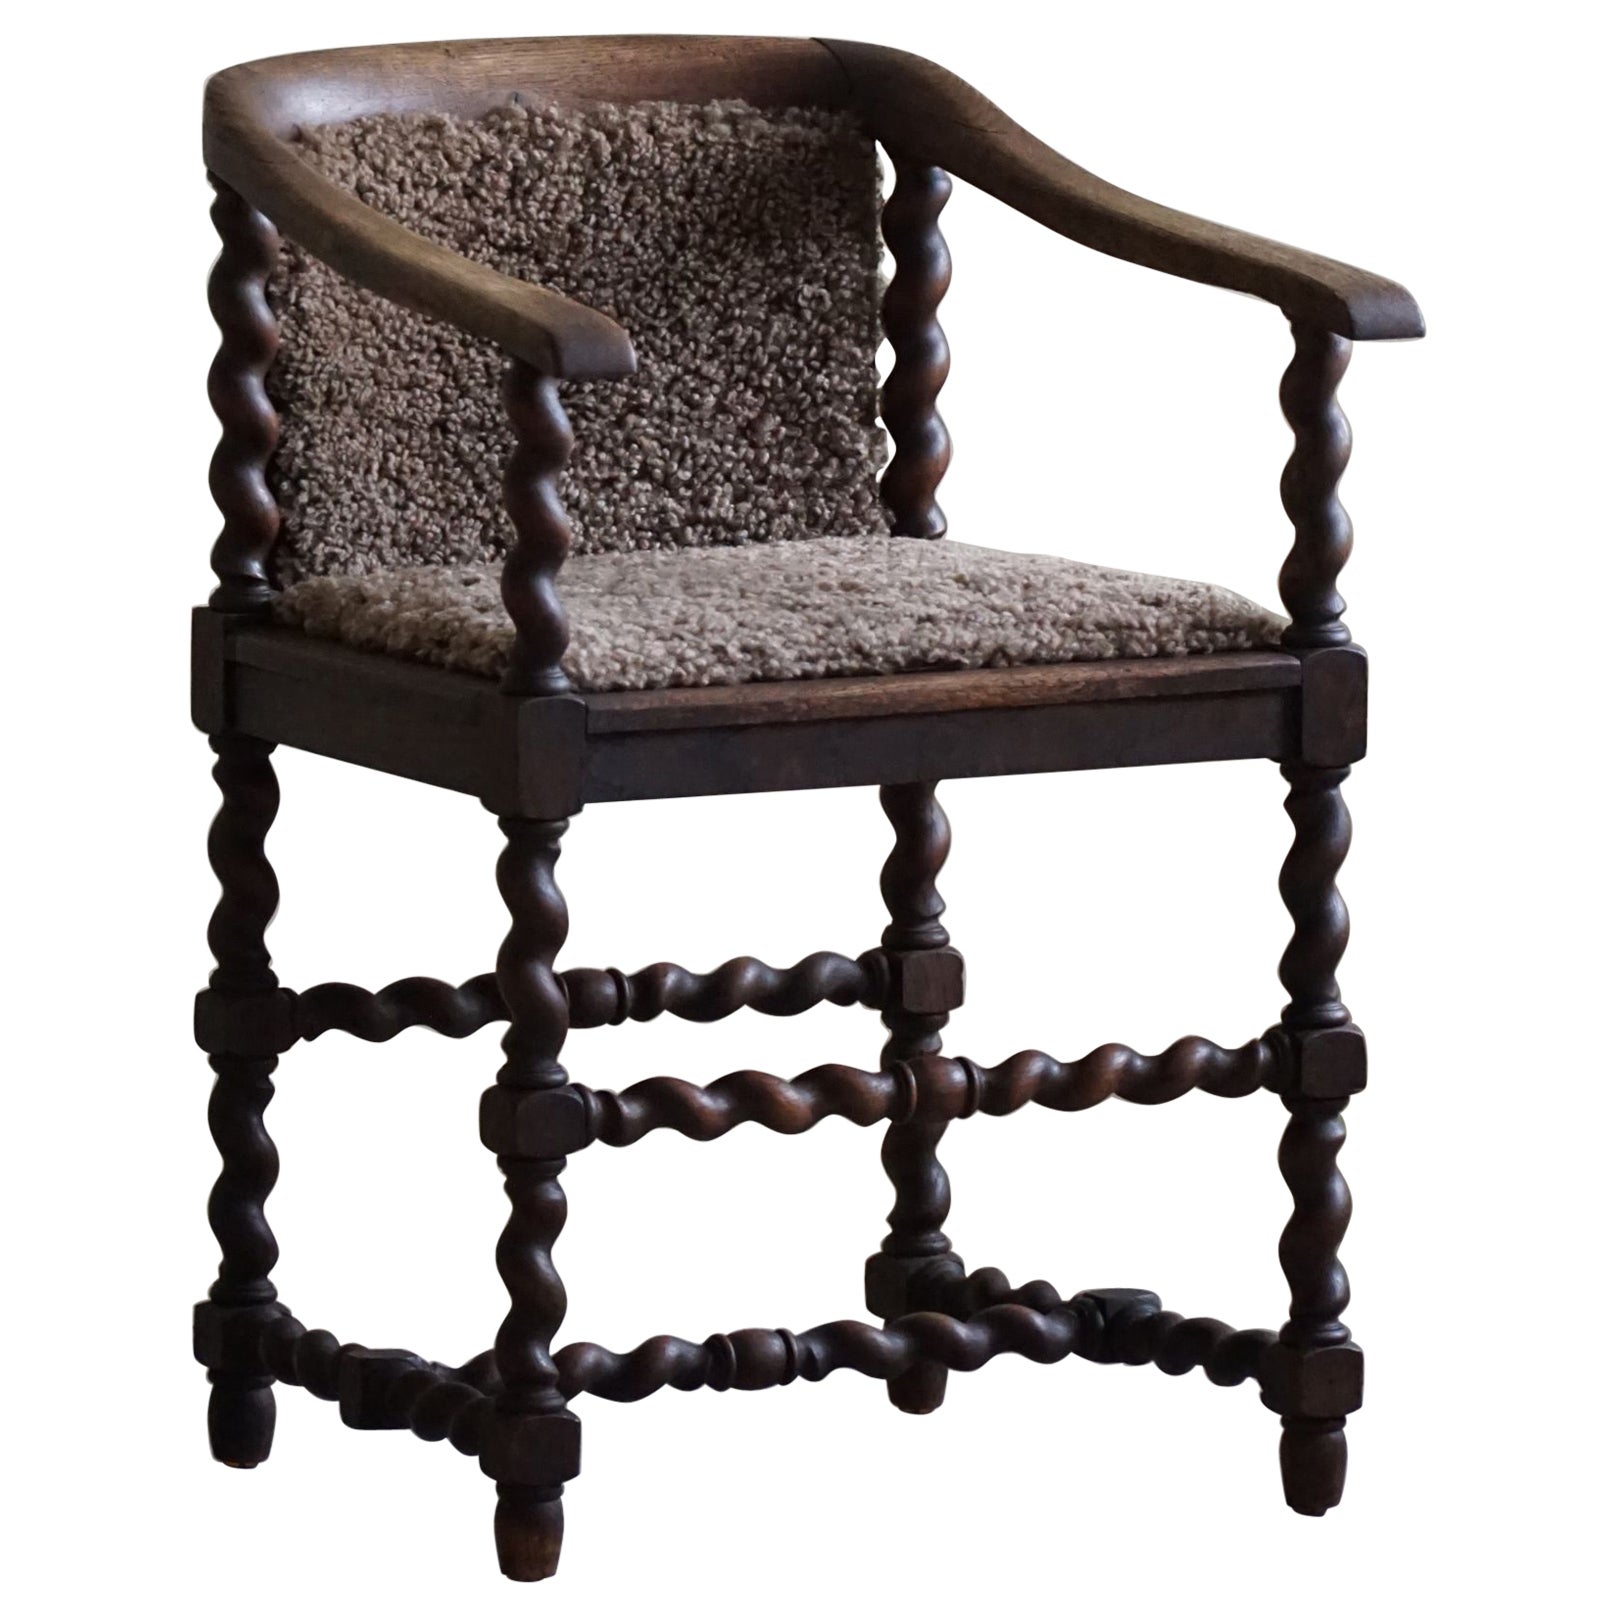 Antique French Armchair, Barley Twisted, Reupholstered in Lambswool, 19th C For Sale